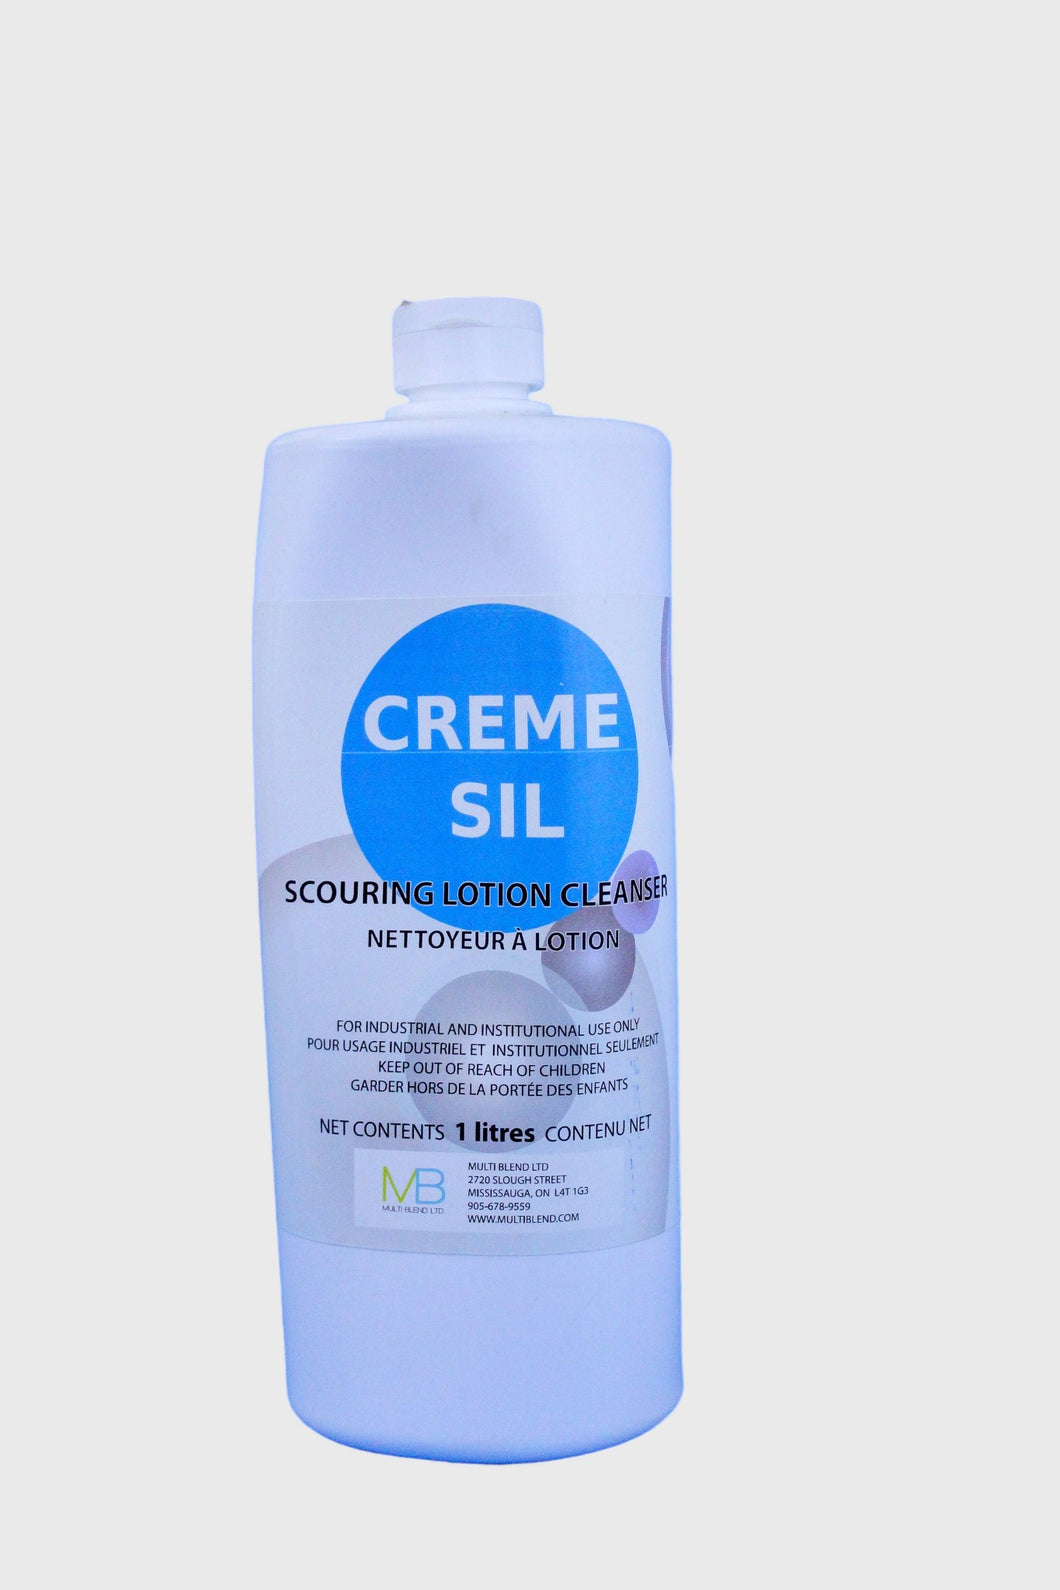 Creme Sil Scouring Lotion Cleanser